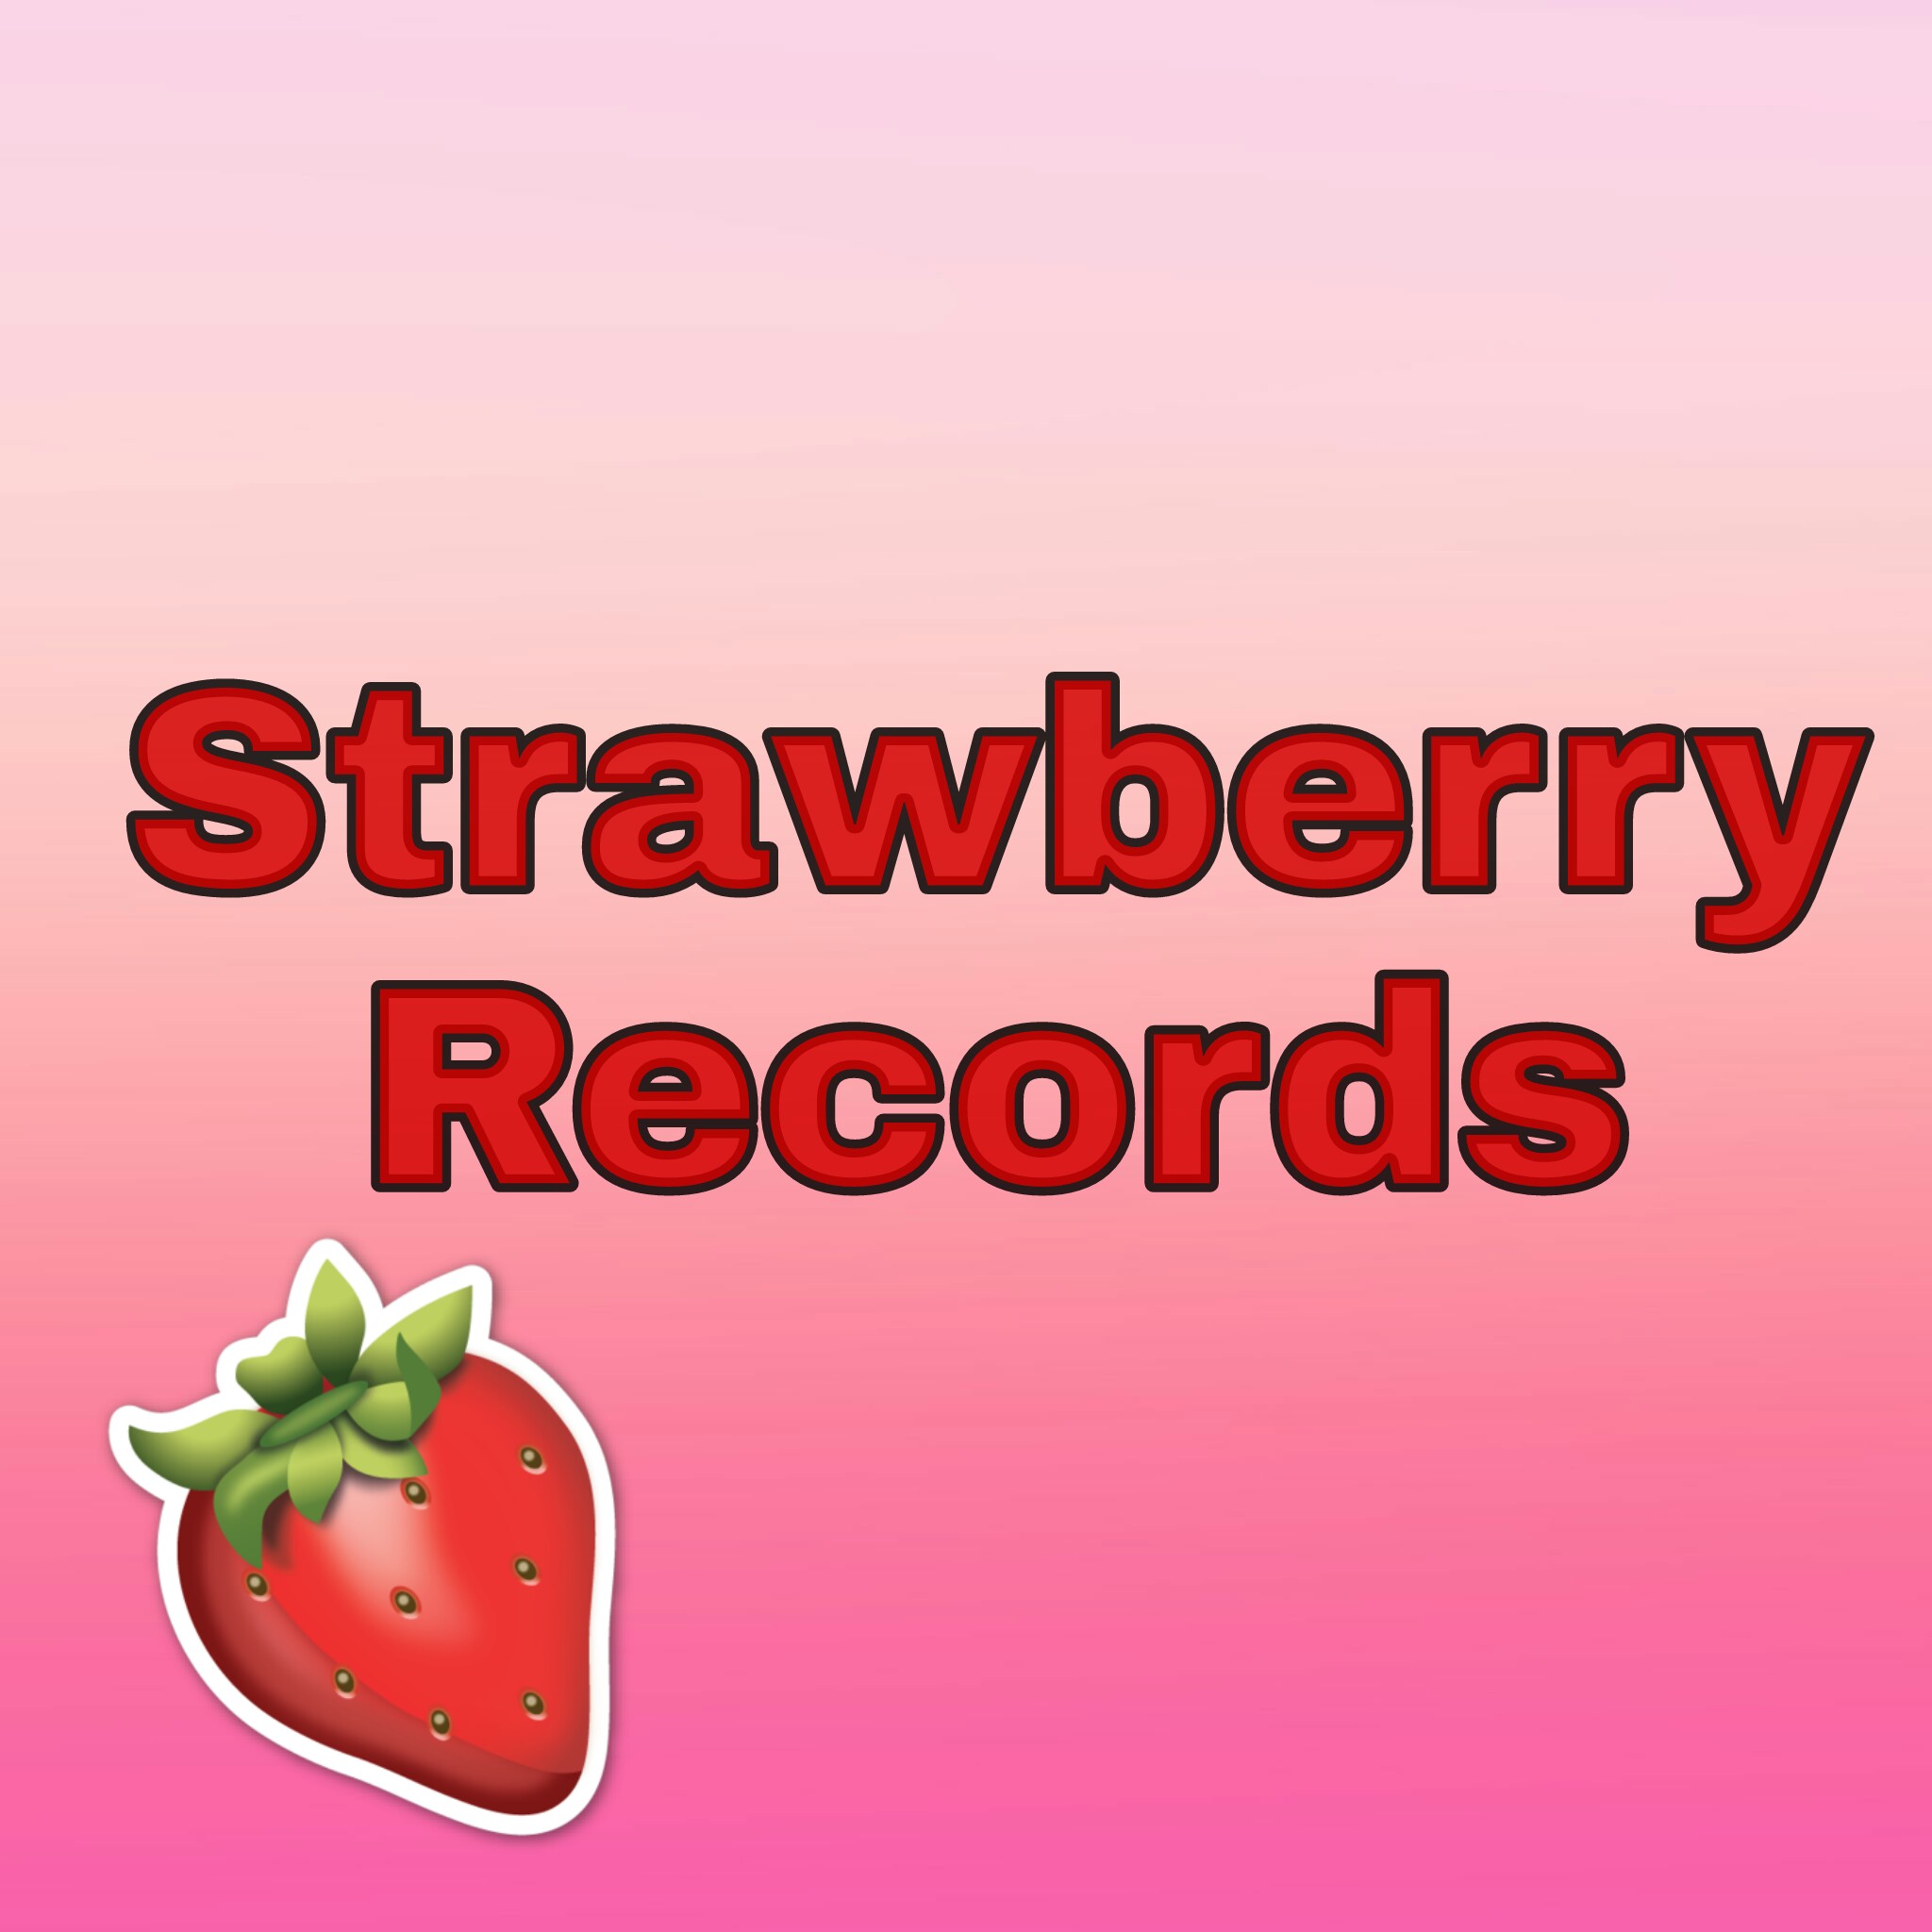 Future Records On Roblox Strawberry Records Will Be R - dangerous woman tour roleplay roblox